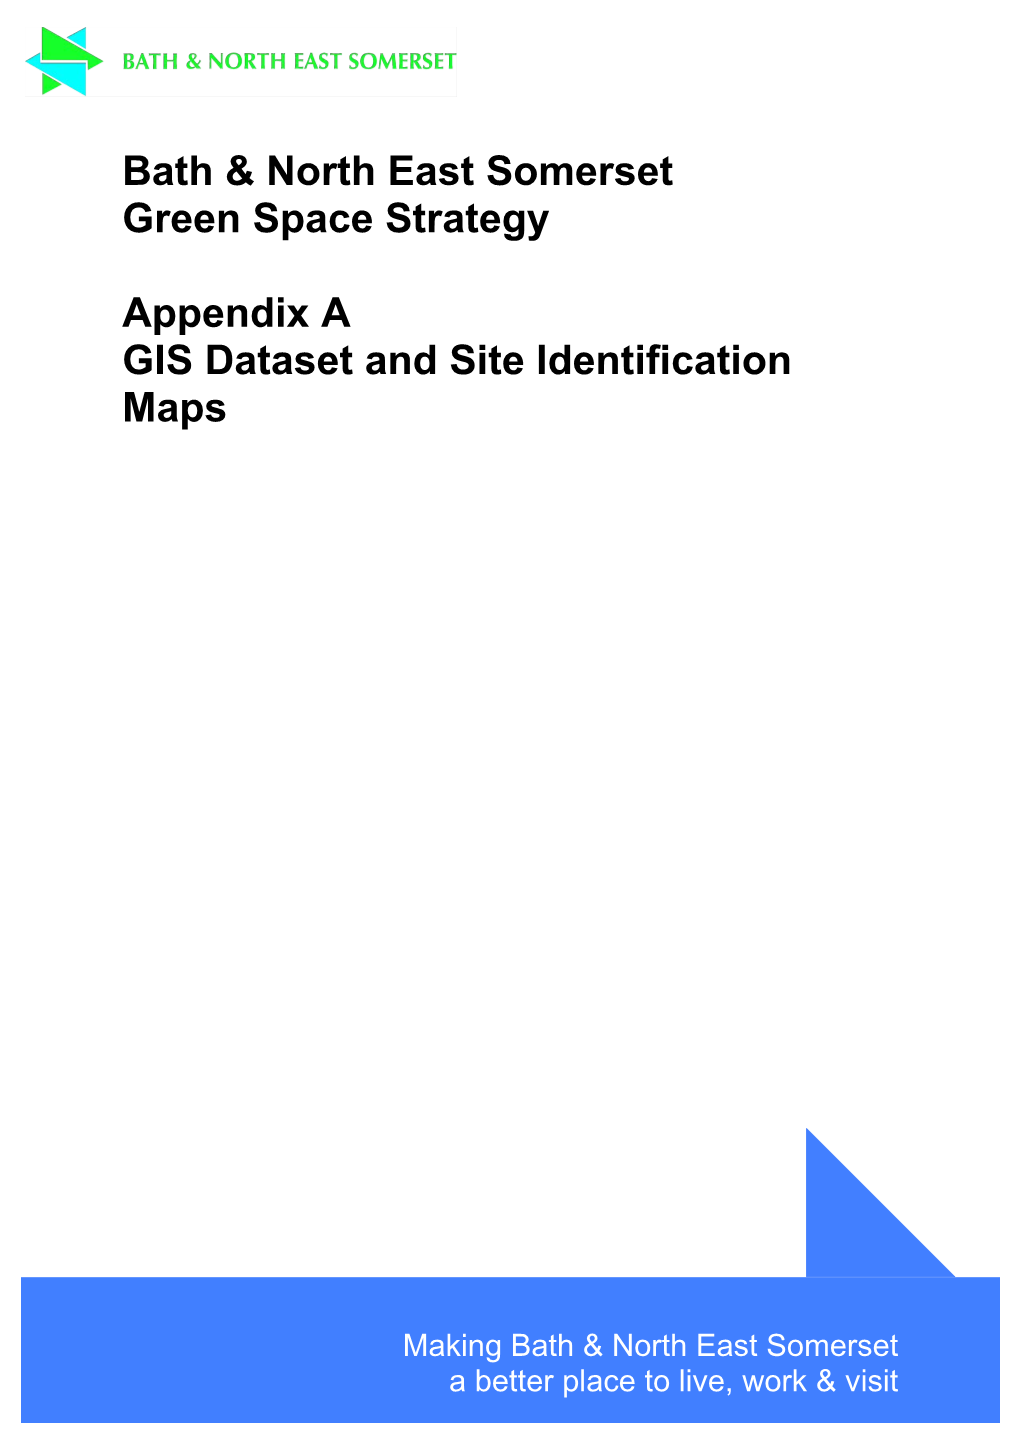 Green Space Strategy Appendix A